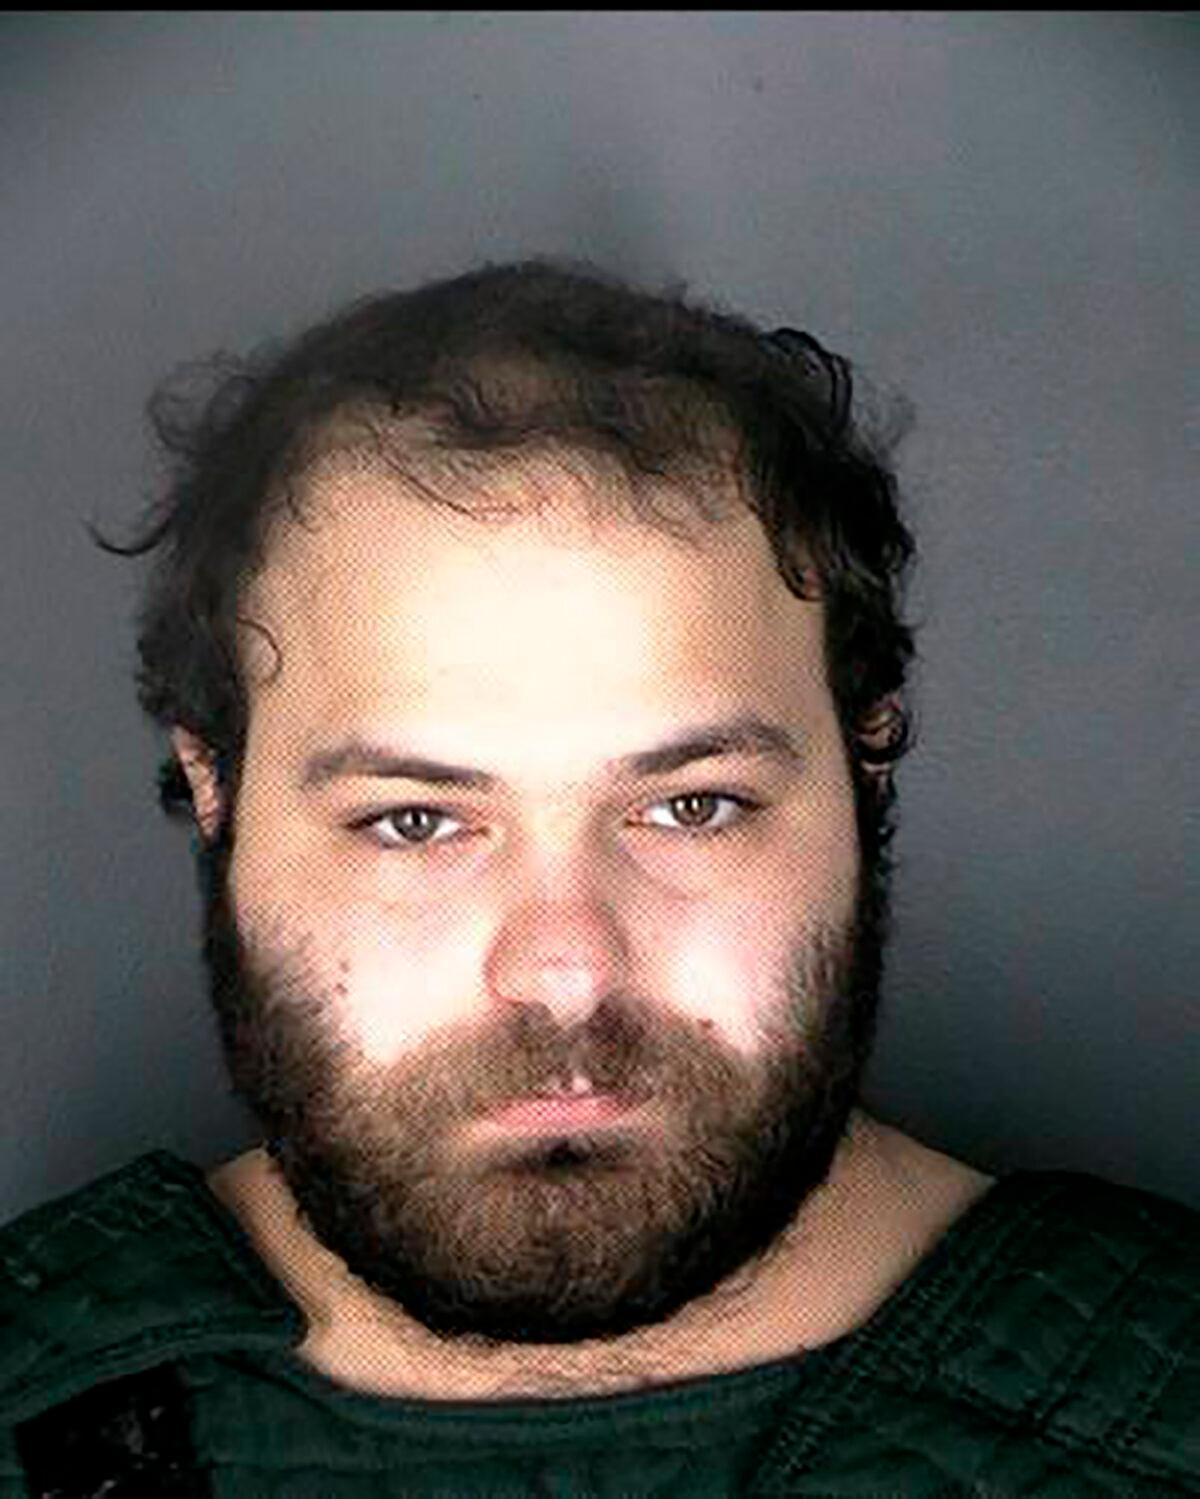 This undated photo provided by the Boulder Police Department shows Colorado shooting suspect Ahmad Al Aliwi Alissa. (Boulder Police Department via AP)